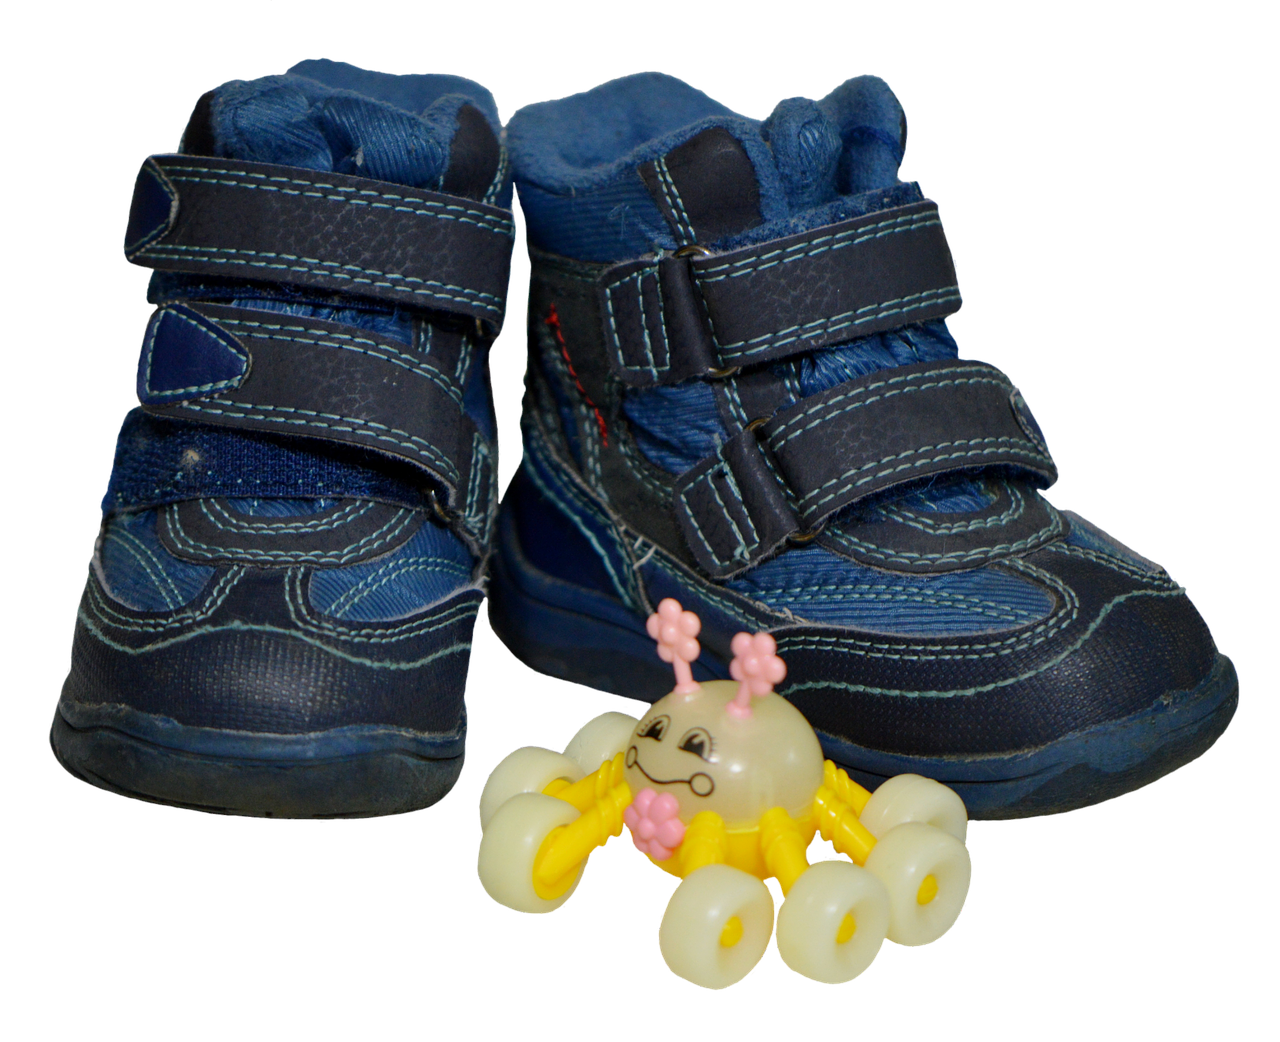 Children's shoes,blue,small,cute,isolated - free image from needpix.com